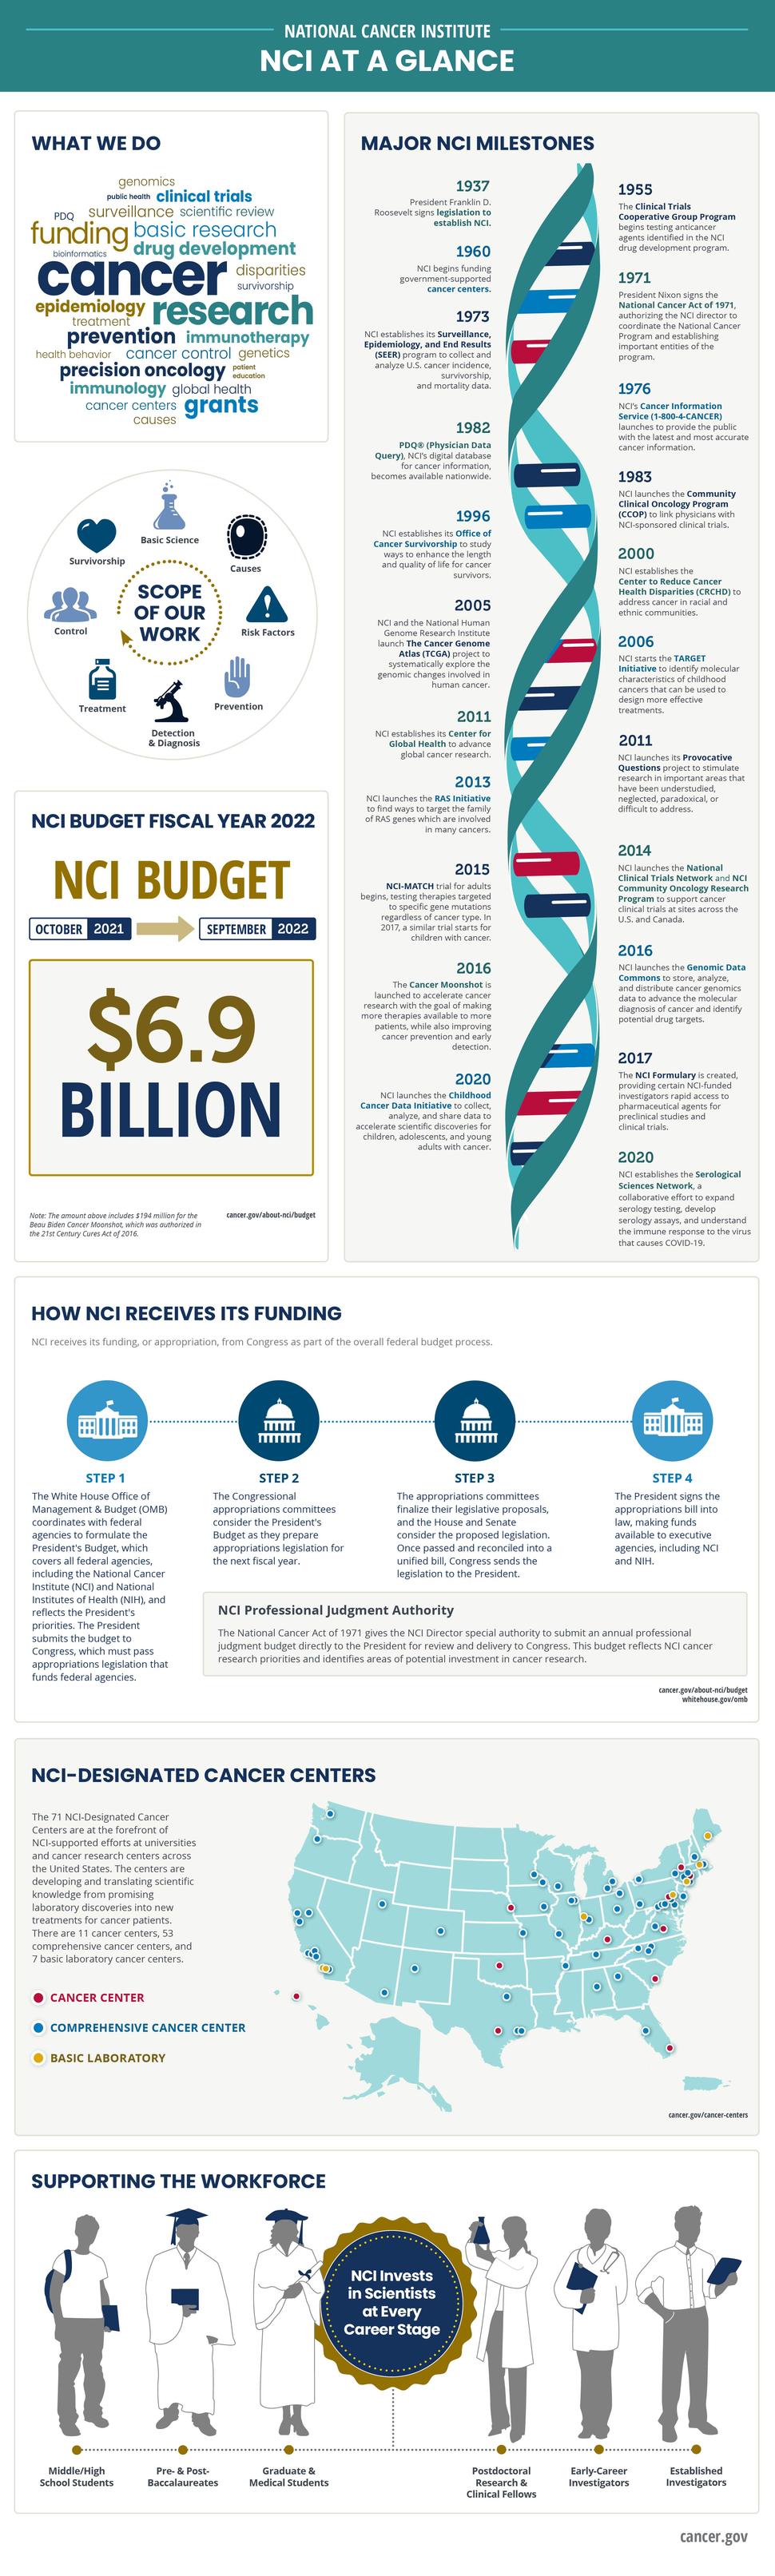 An overview of NCI's historical milestones, funding process, training efforts, and the NCI-designated cancer centers. NCI's work includes genomics, public health, clinical trials, surveillance, scientific review, basic research, funding, drug development, disparities research, survivorship research, and more. Funds available to the NCI in FY 2022 totaled $6.9 billion. NCI invests in scientists at every education and career stage from middle and high school students through established investigators.